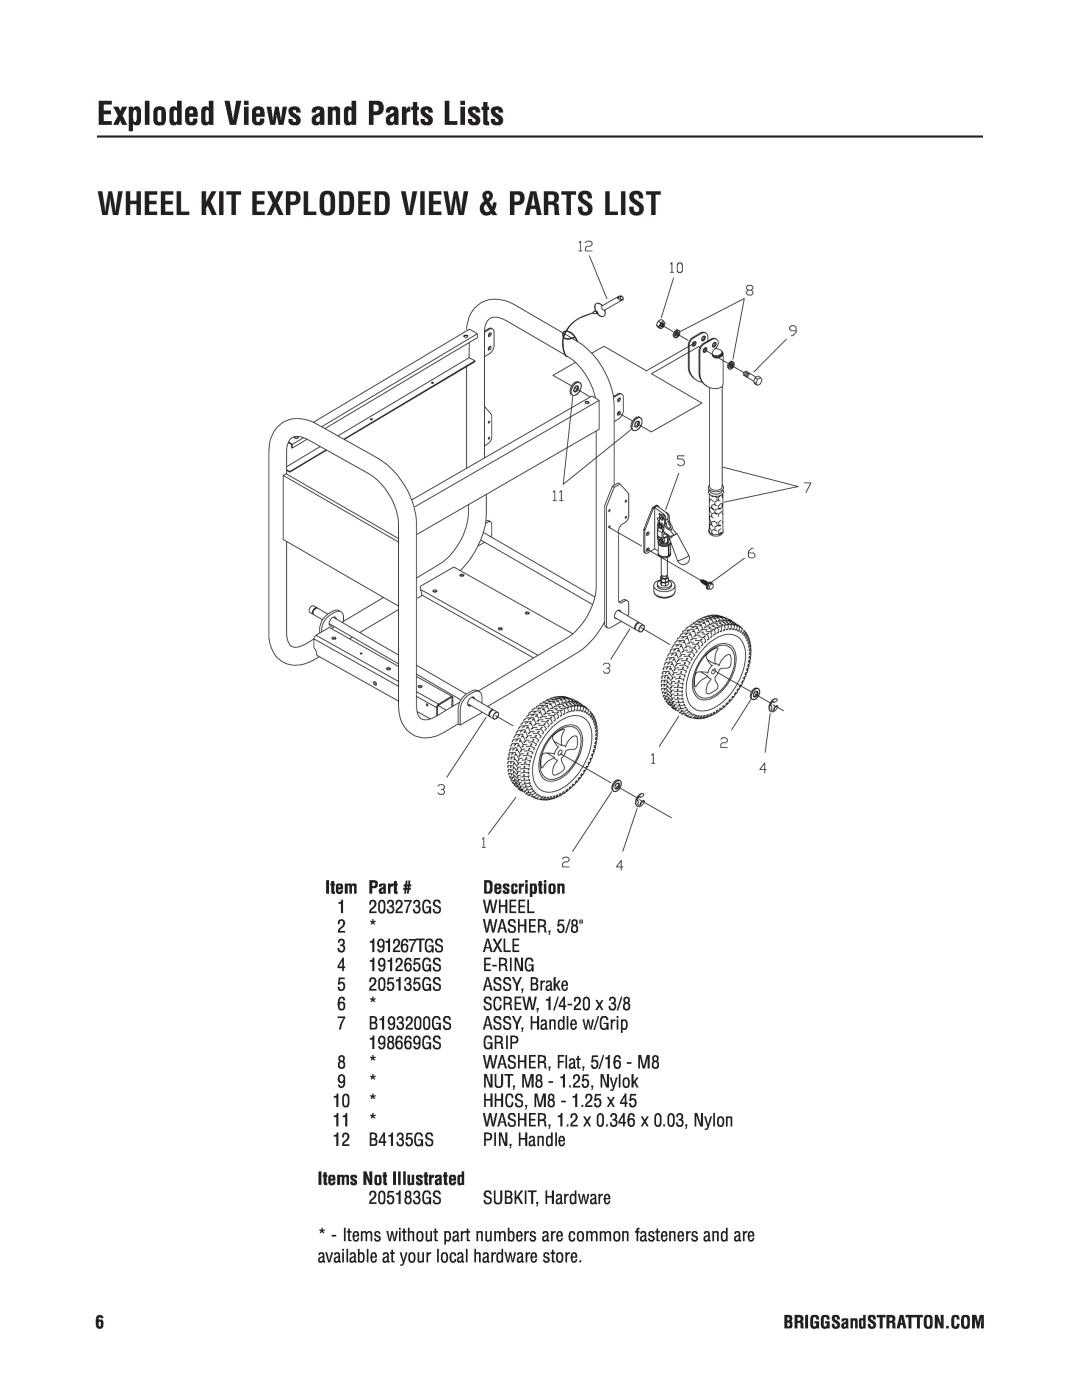 Briggs & Stratton 30382 manual Wheel Kit Exploded View & Parts List, Exploded Views and Parts Lists, Description 